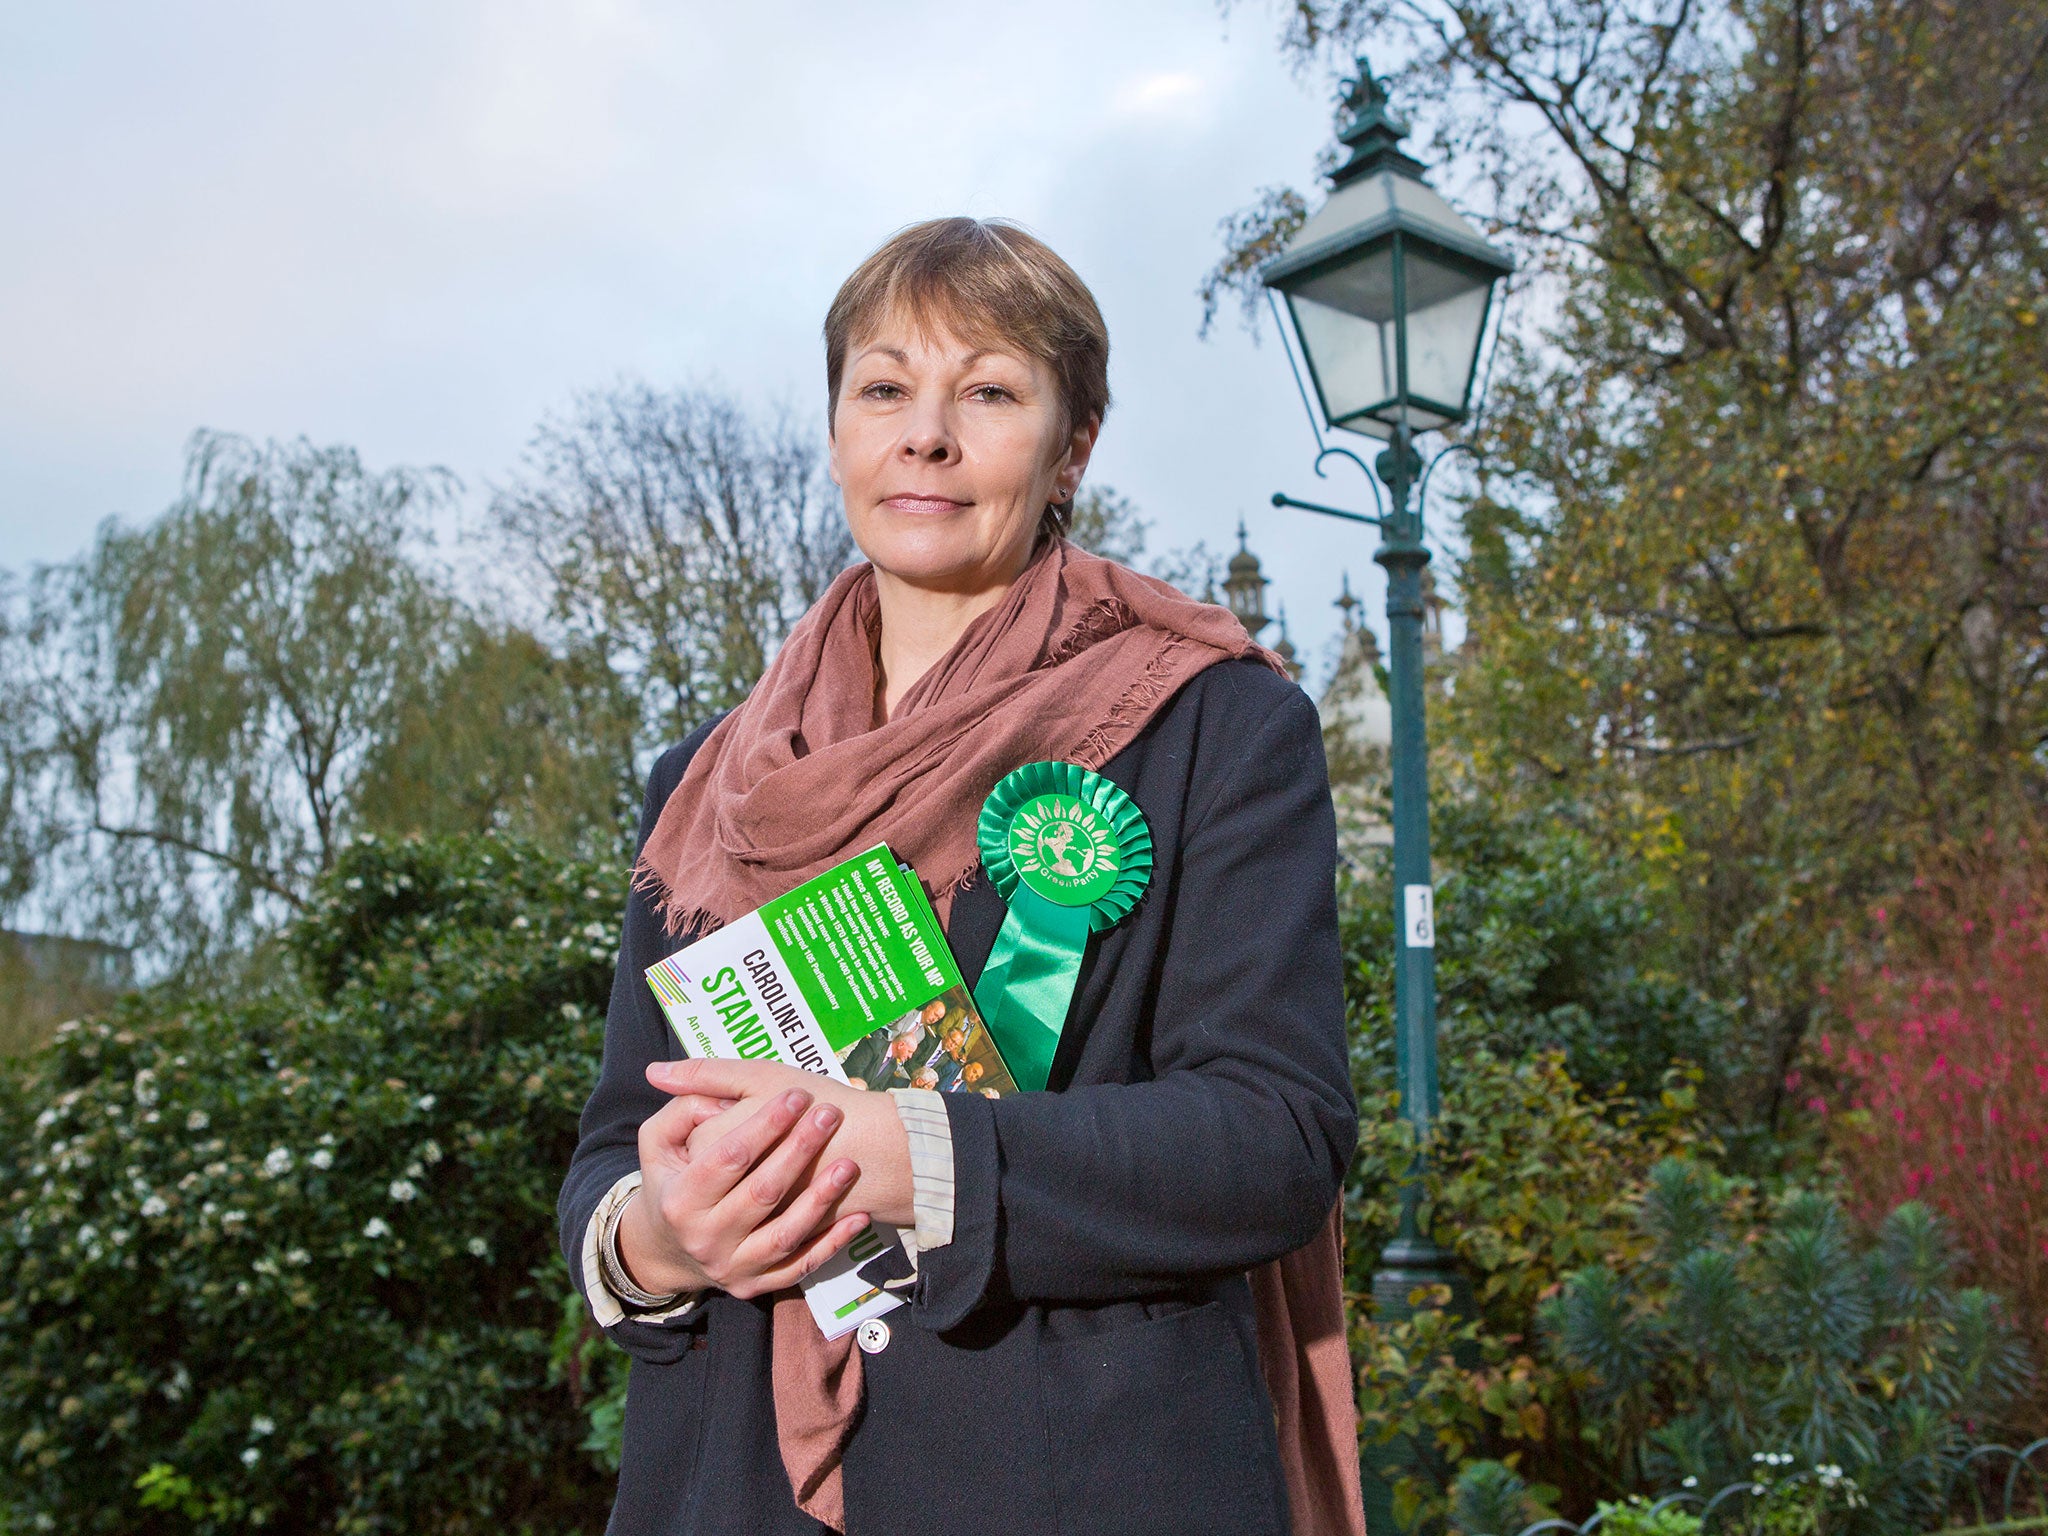 Caroline Lucas says her party is prospering from a continued backlash against the Liberal Democrats